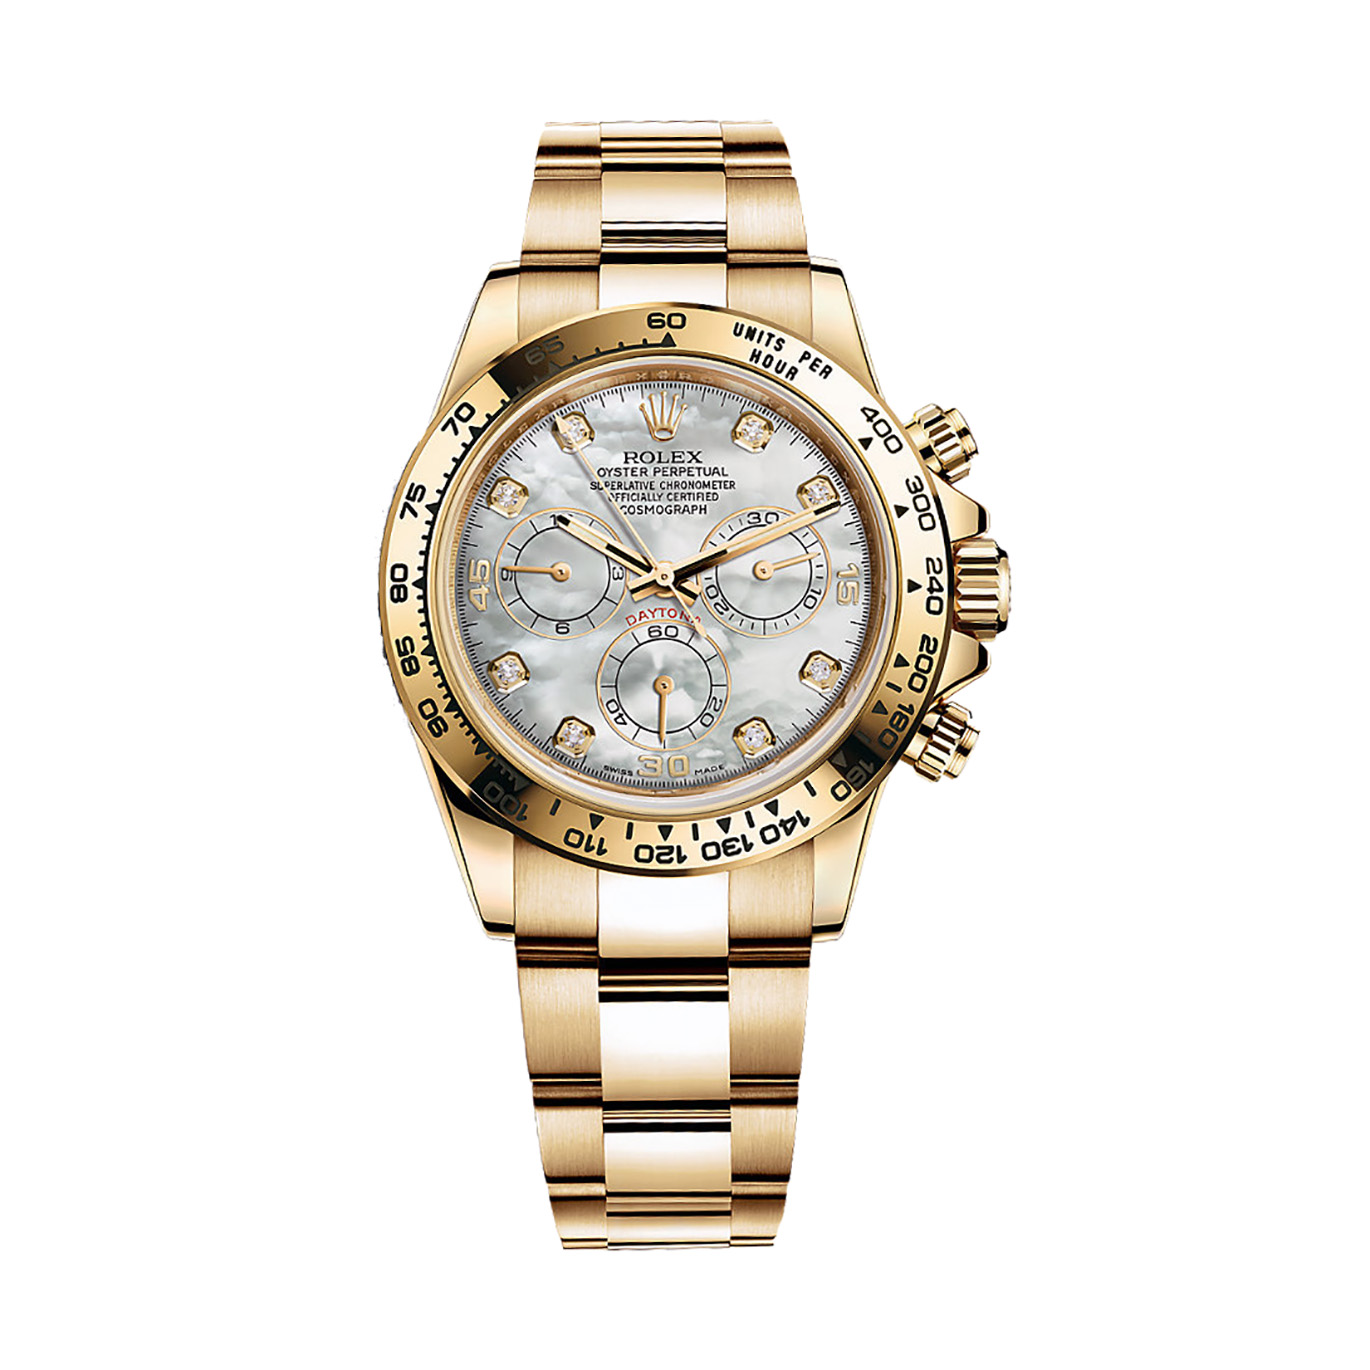 Cosmograph Daytona 116508 Gold Watch (White Mother-Of-Pearl Set With Diamonds)